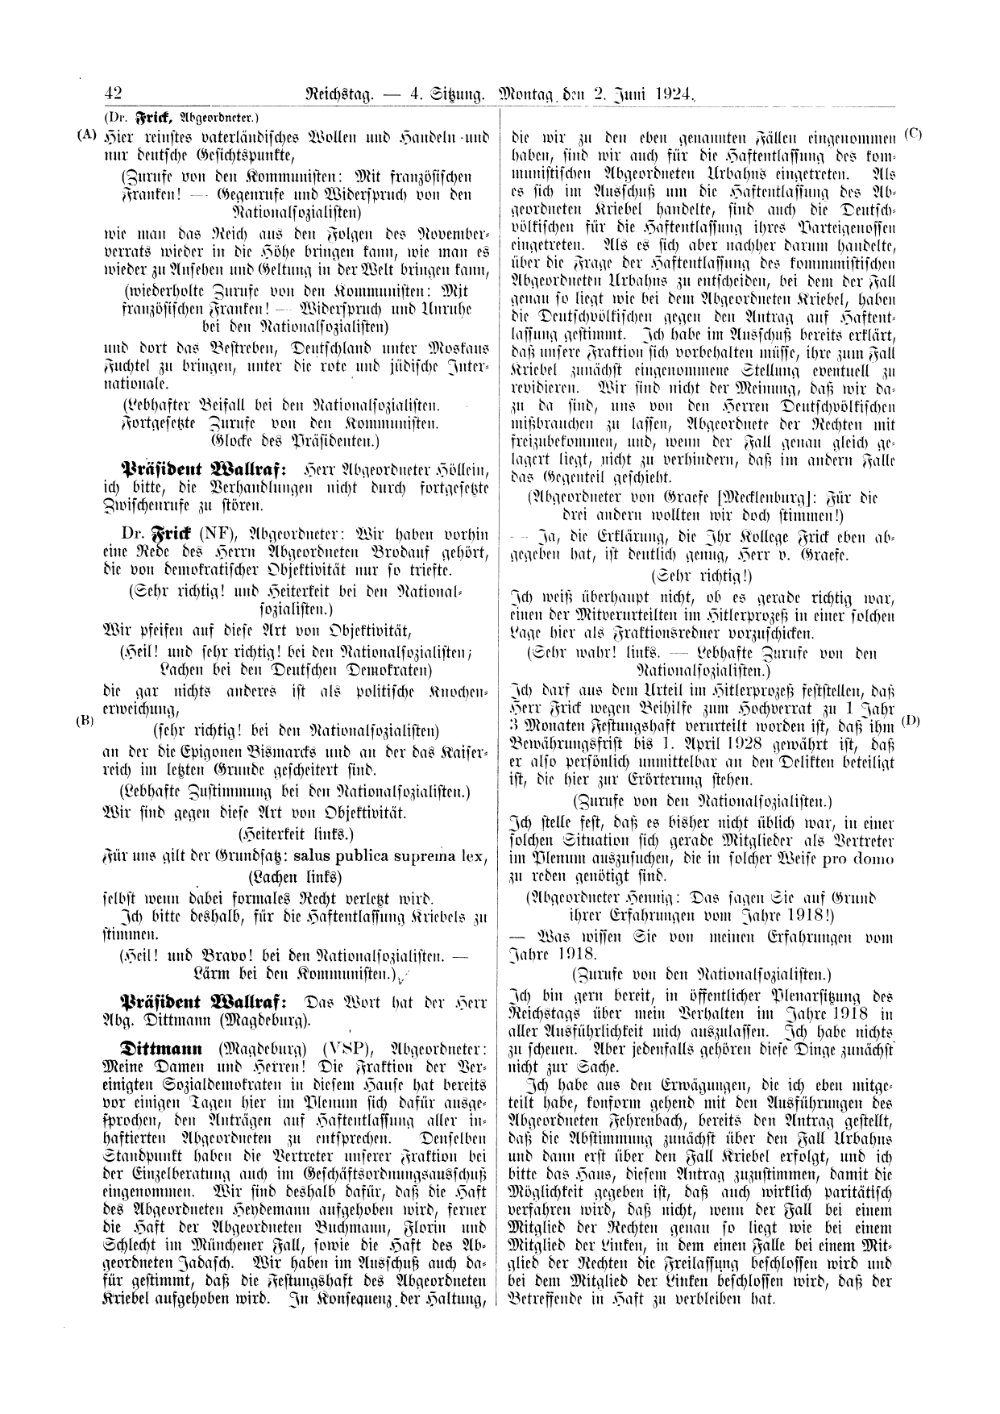 Scan of page 42